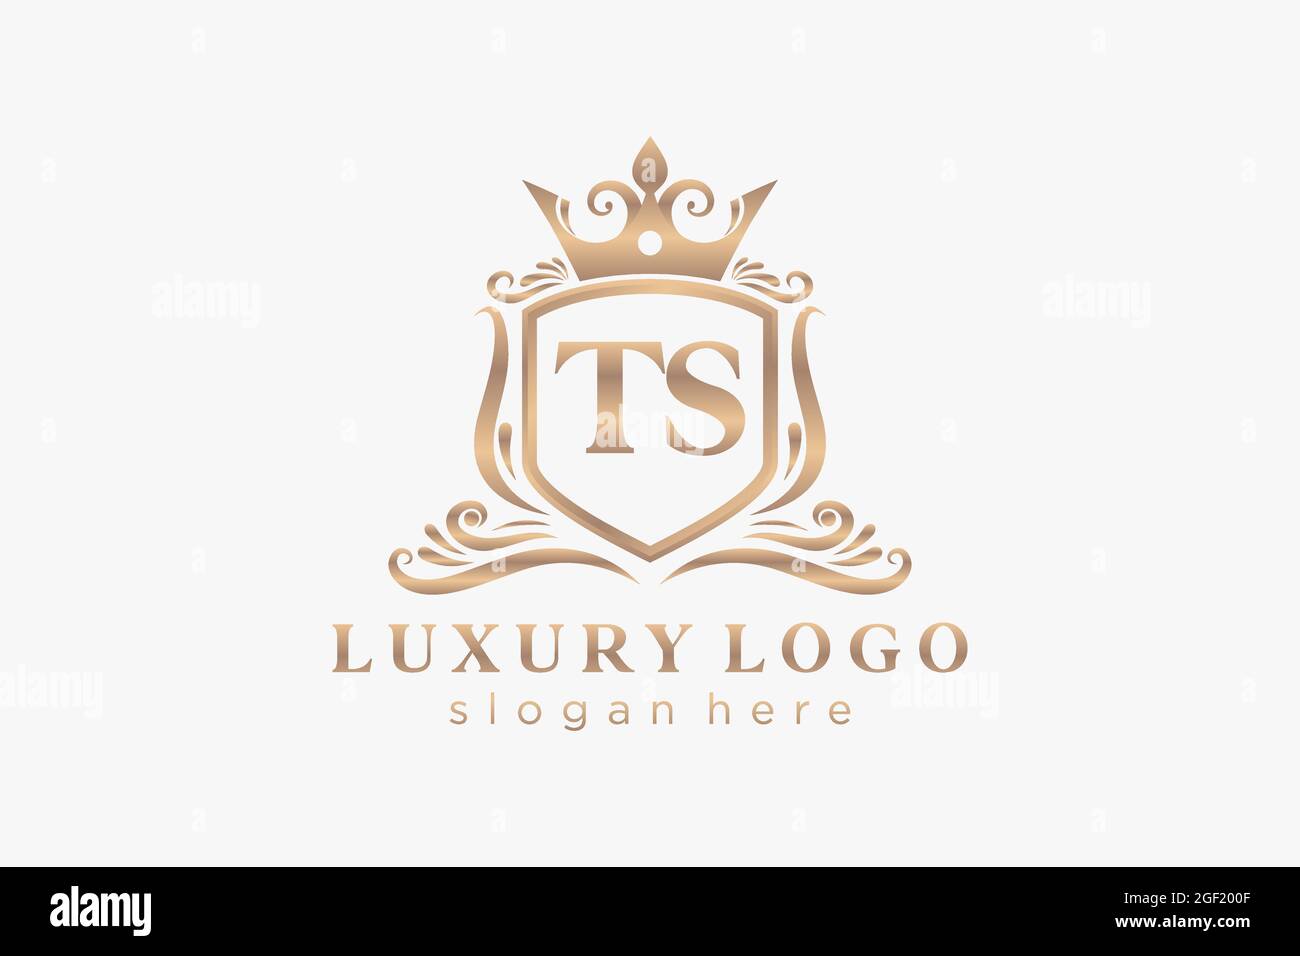 TS Letter Royal Luxury Logo template in vector art for Restaurant, Royalty, Boutique, Cafe, Hotel, Heraldic, Jewelry, Fashion and other vector illustr Stock Vector